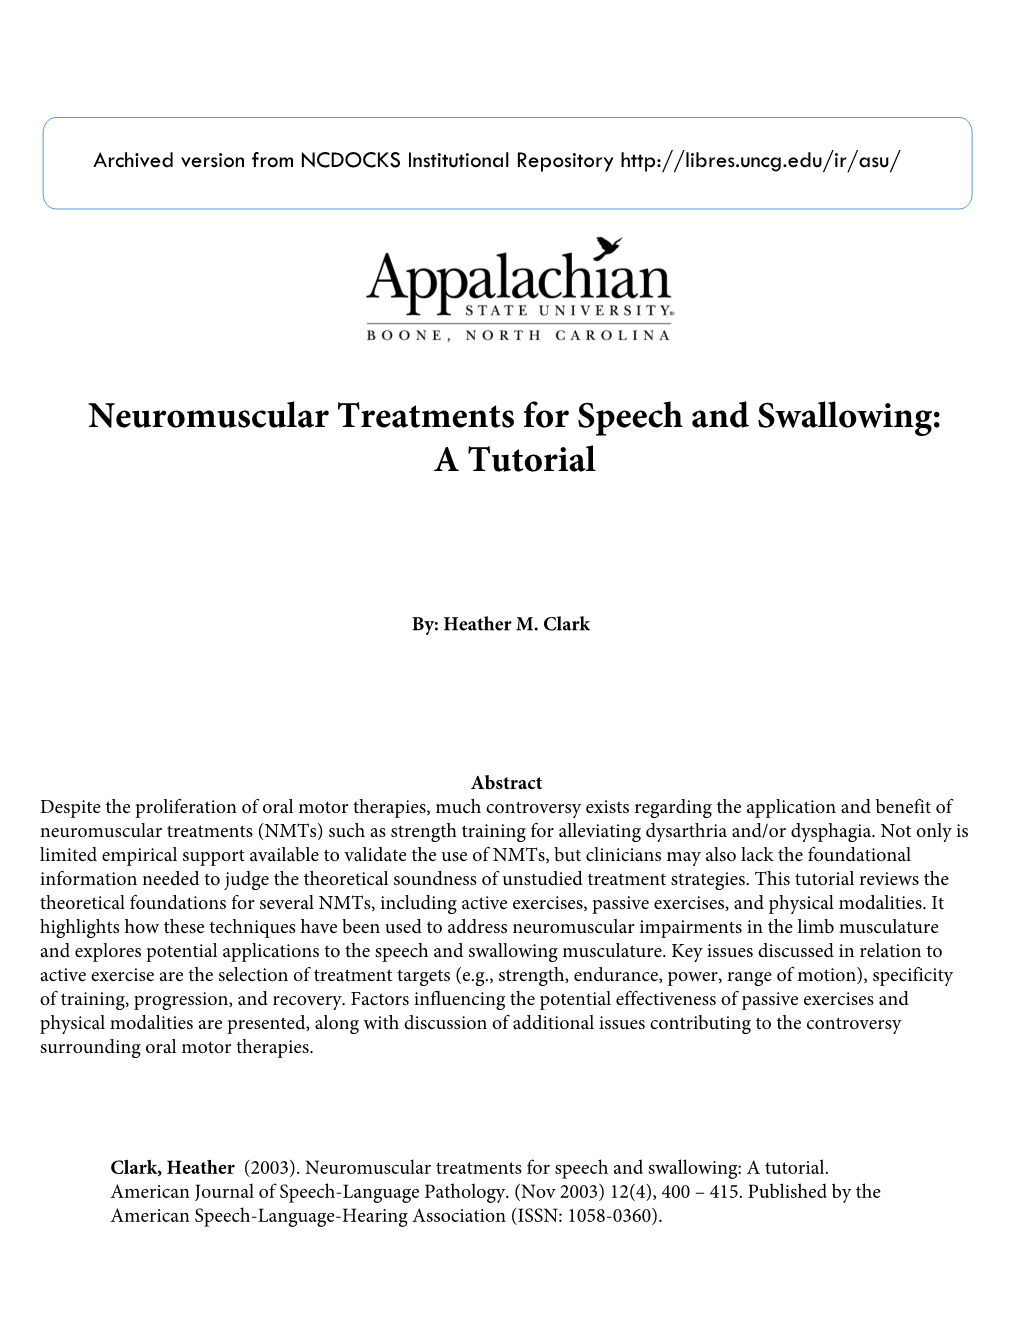 Neuromuscular Treatments for Speech and Swallowing: a Tutorial